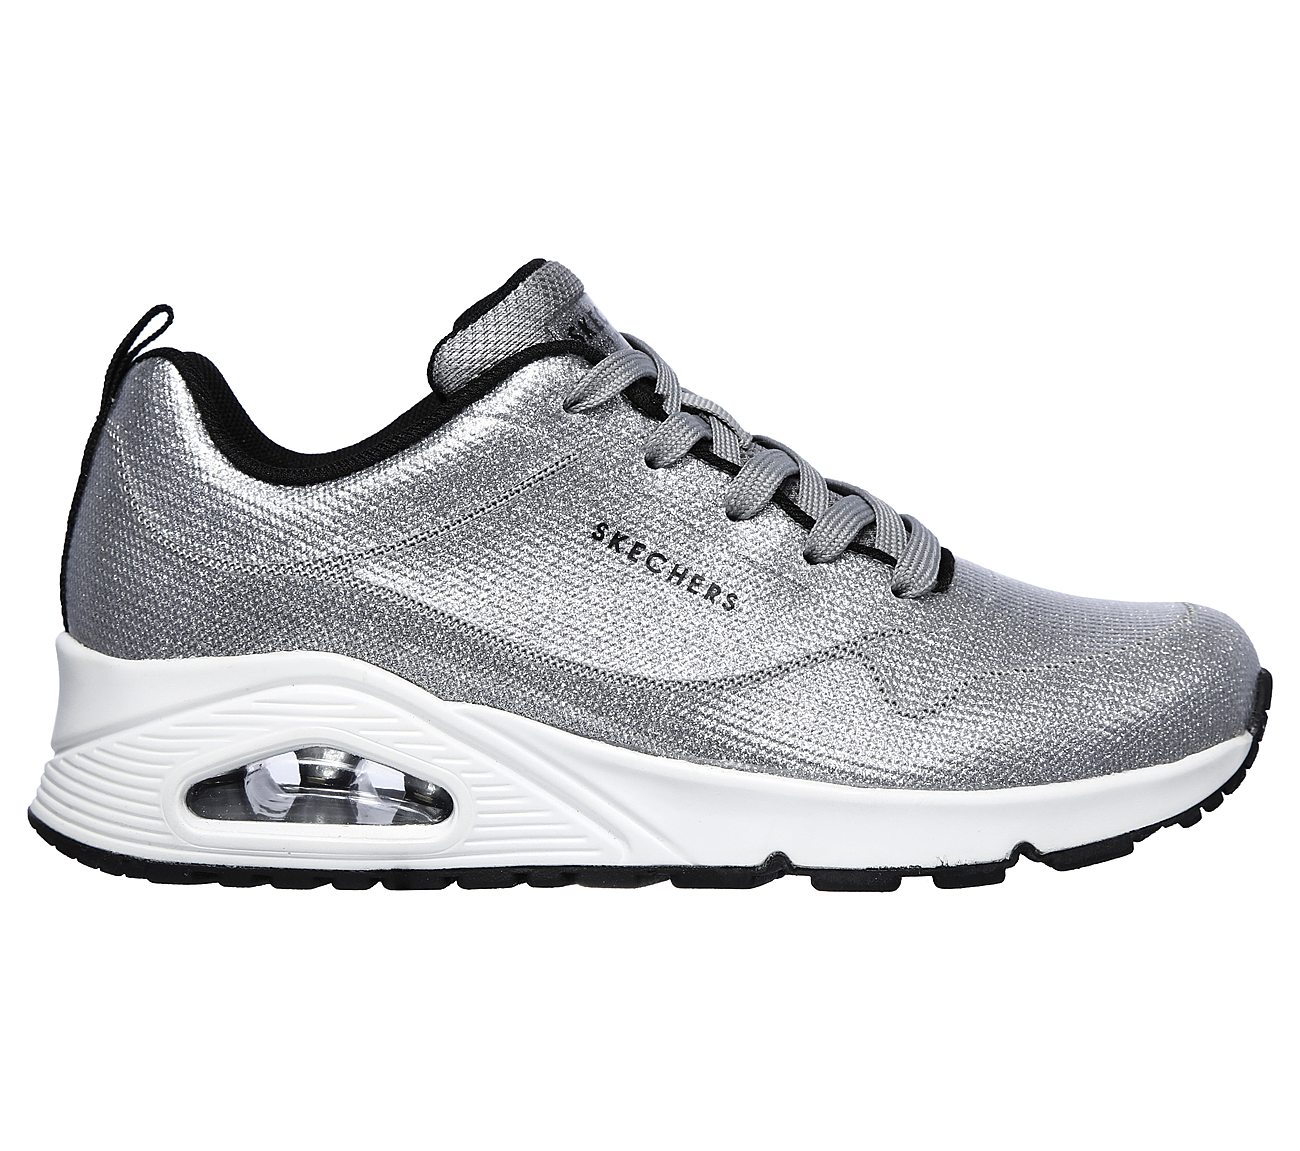 skechers campbell tucson